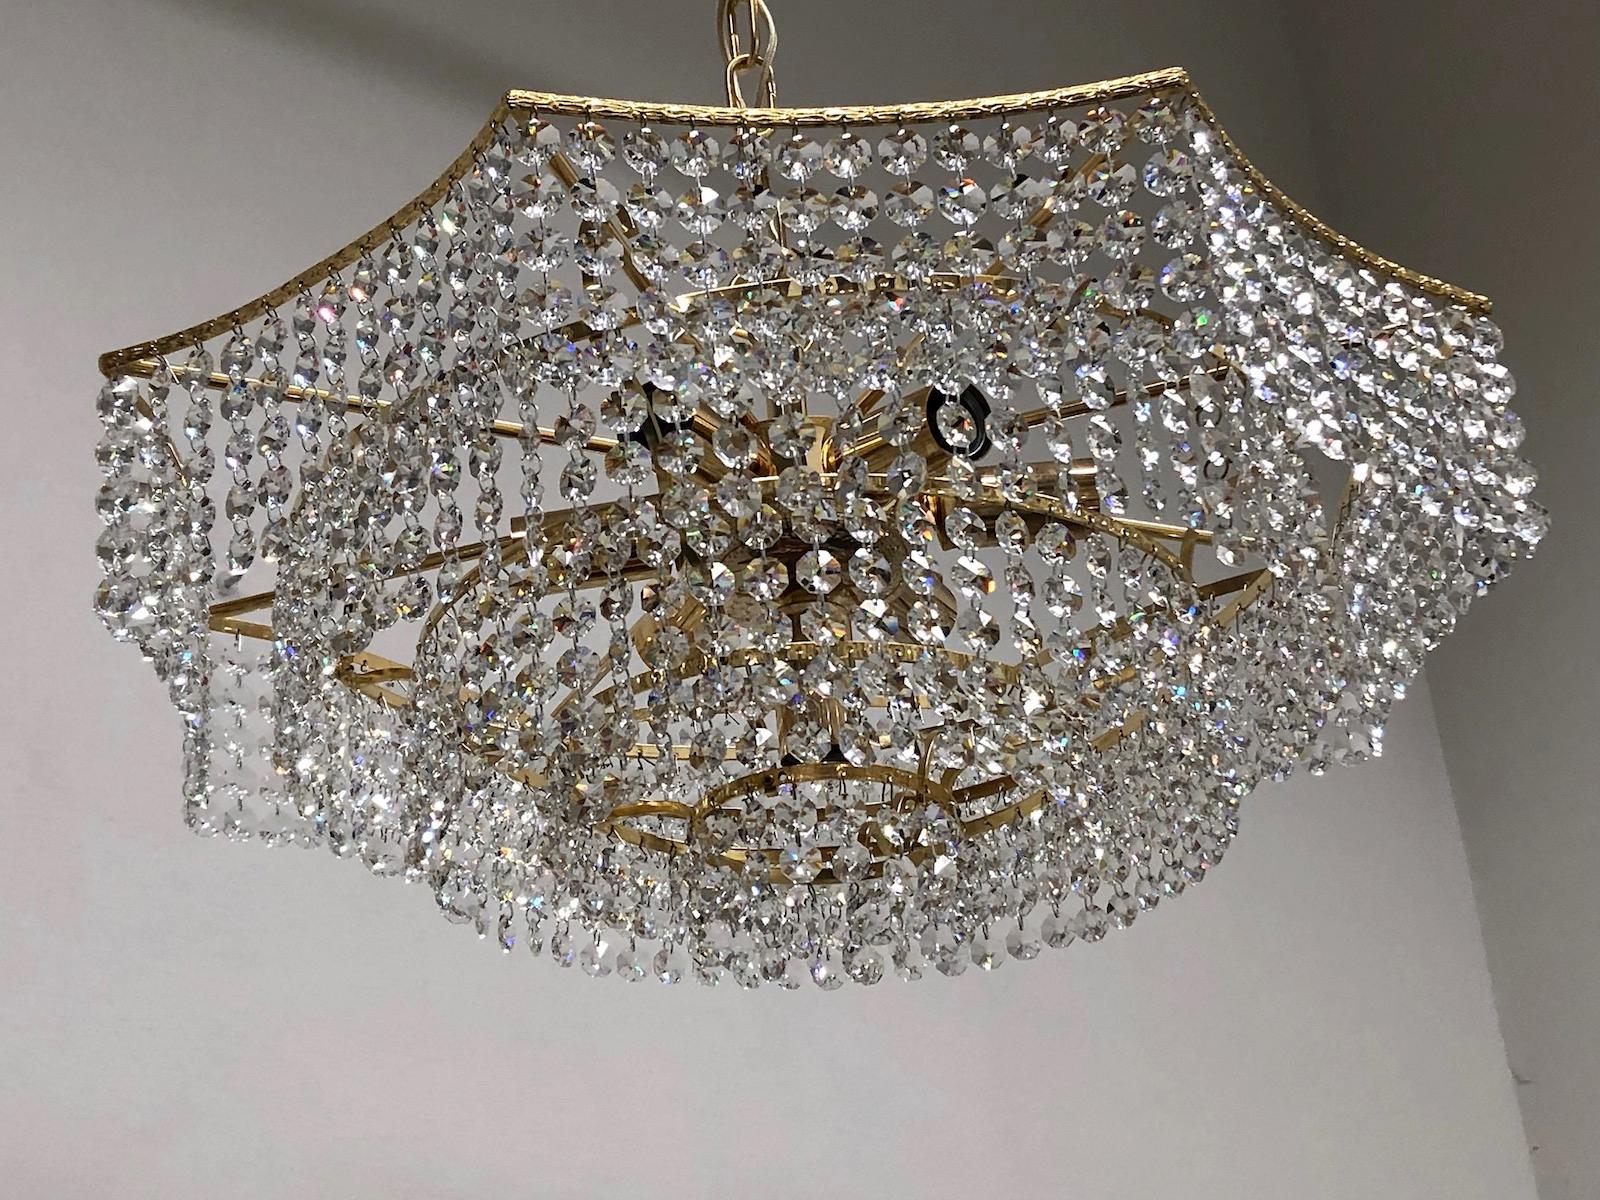 Brass and Crystal Glass Waterfall Chandelier, Richard Essig, Germany, 1960s For Sale 1